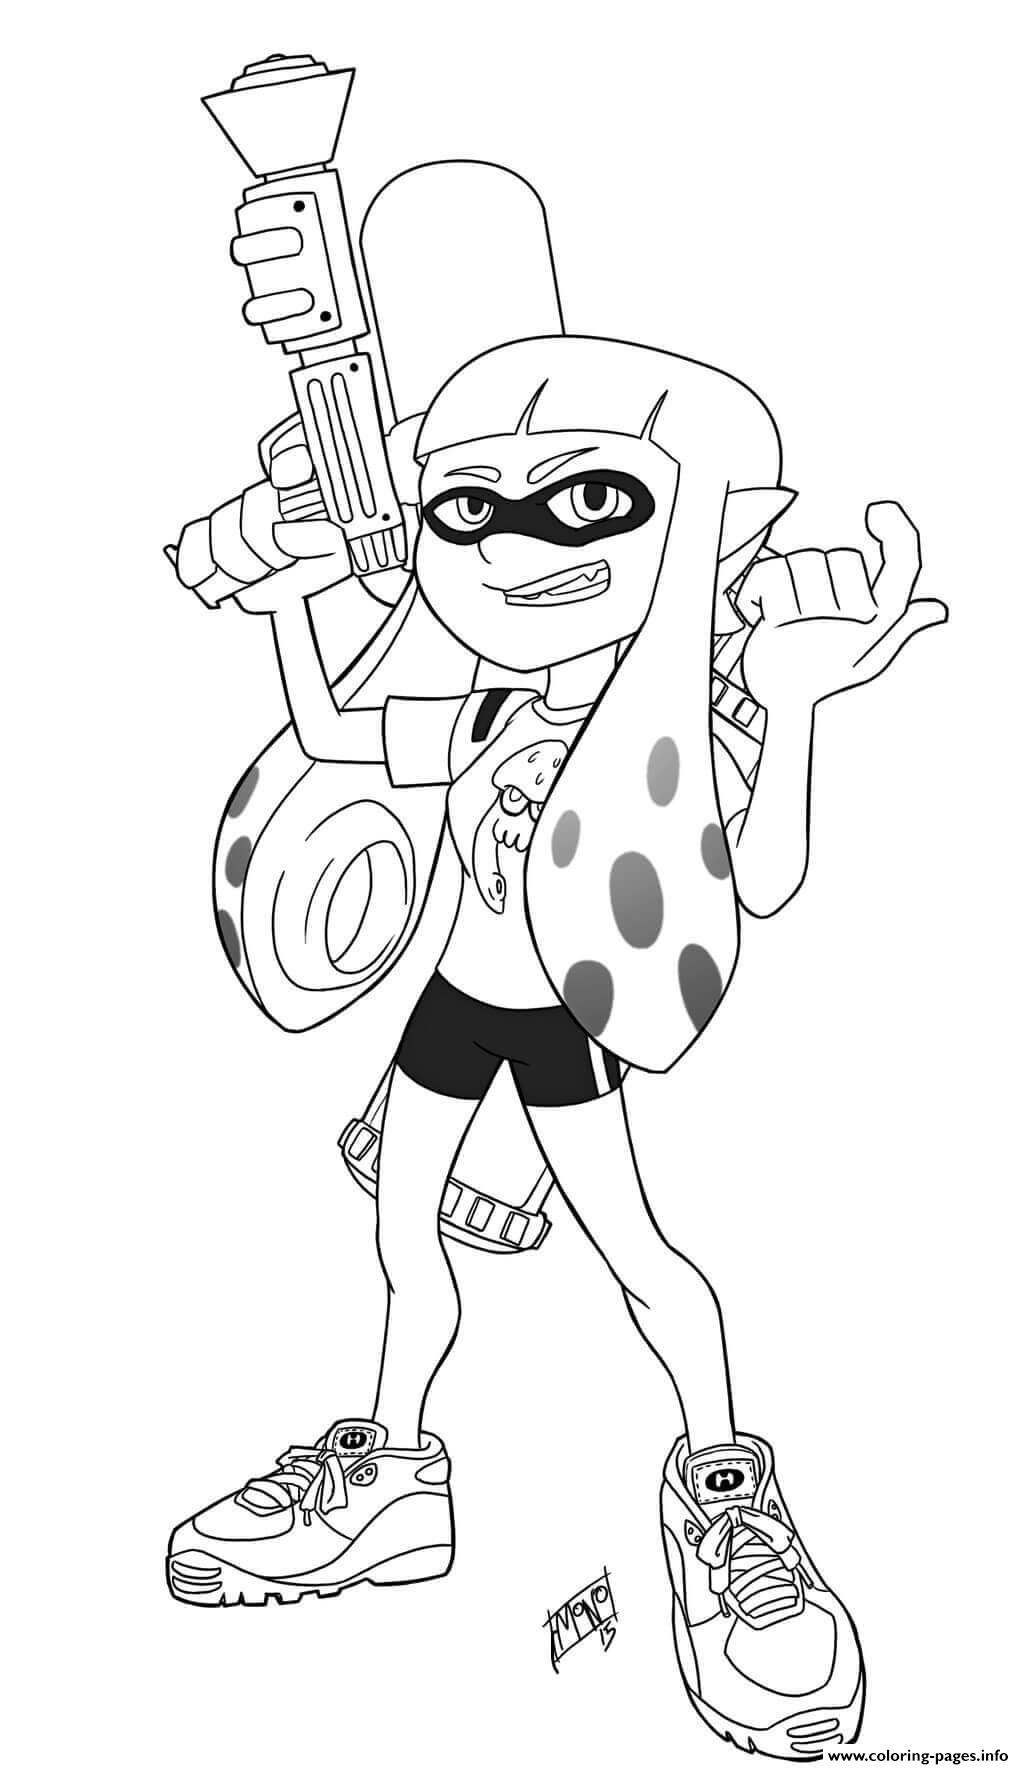 Inklings Can Alternate Between Humanoid And Squid Form Coloring Pages